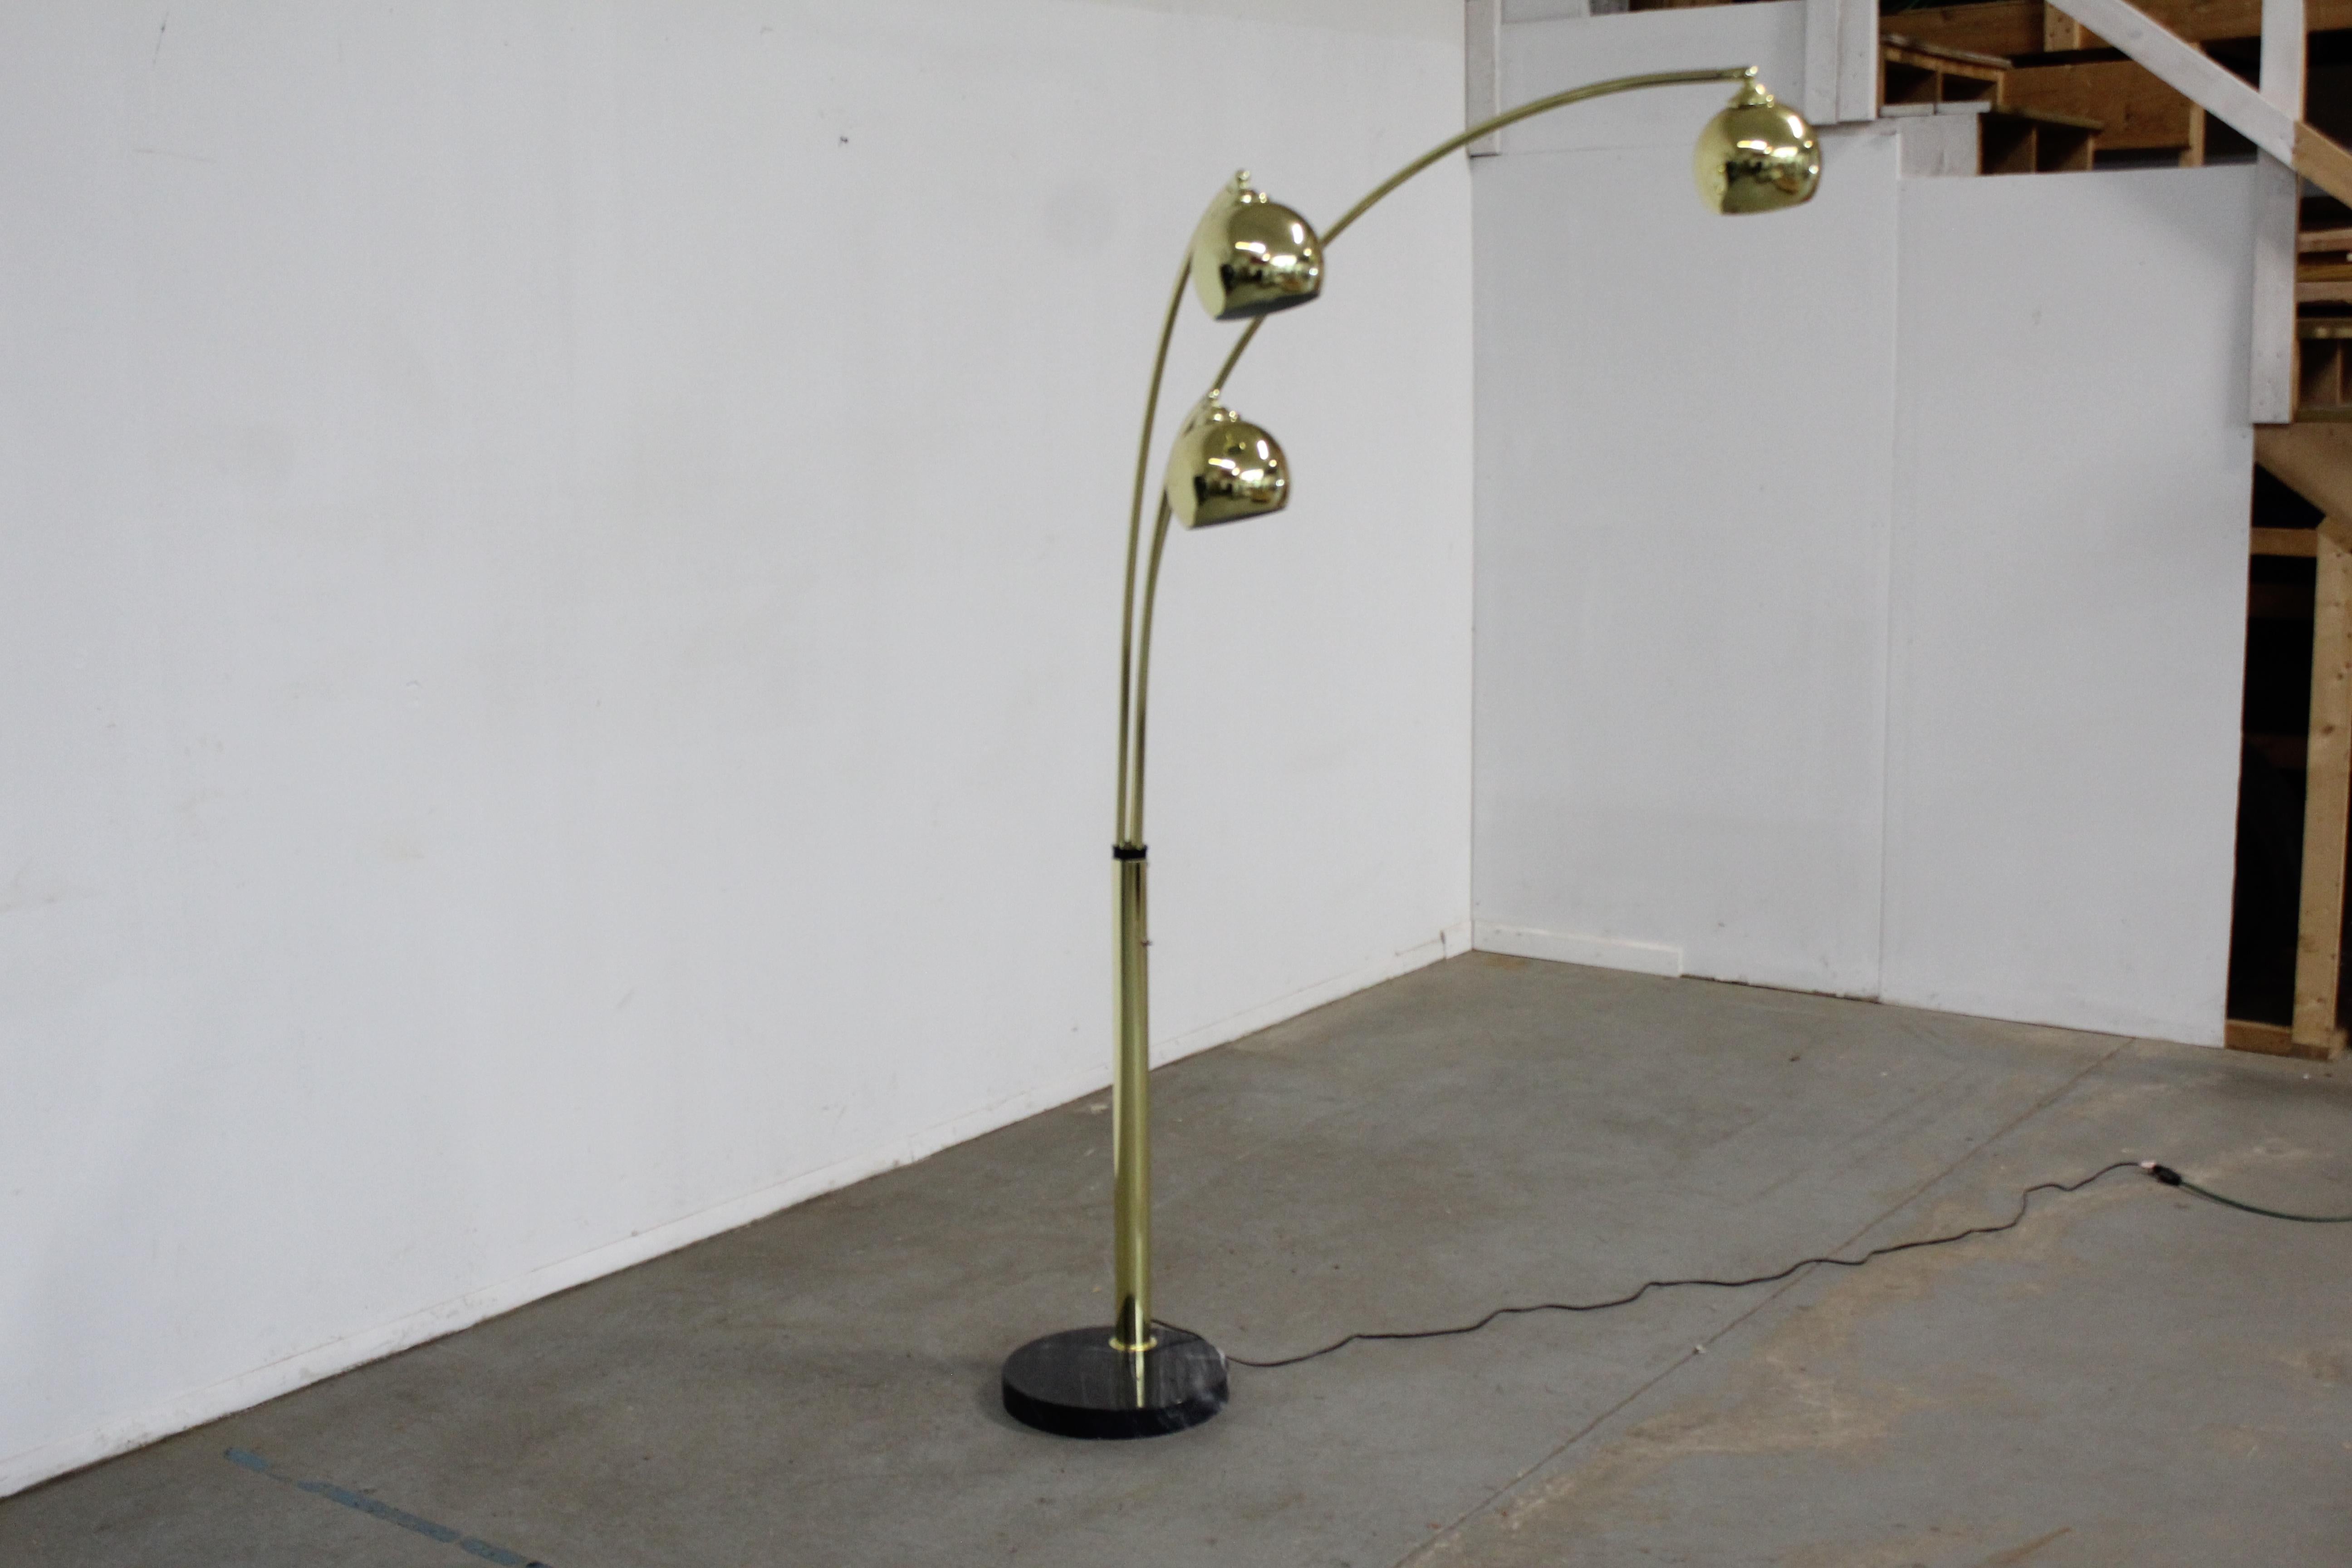 Offered is a super unique, vintage Italian chrome and marble floor lamp. Features a marble base with 3 arc-shaped chrome swiveling rods and 3 bulbs that pivot. The heads swivel from left to right and the pivot. The arms swivel about 180 degrees, not